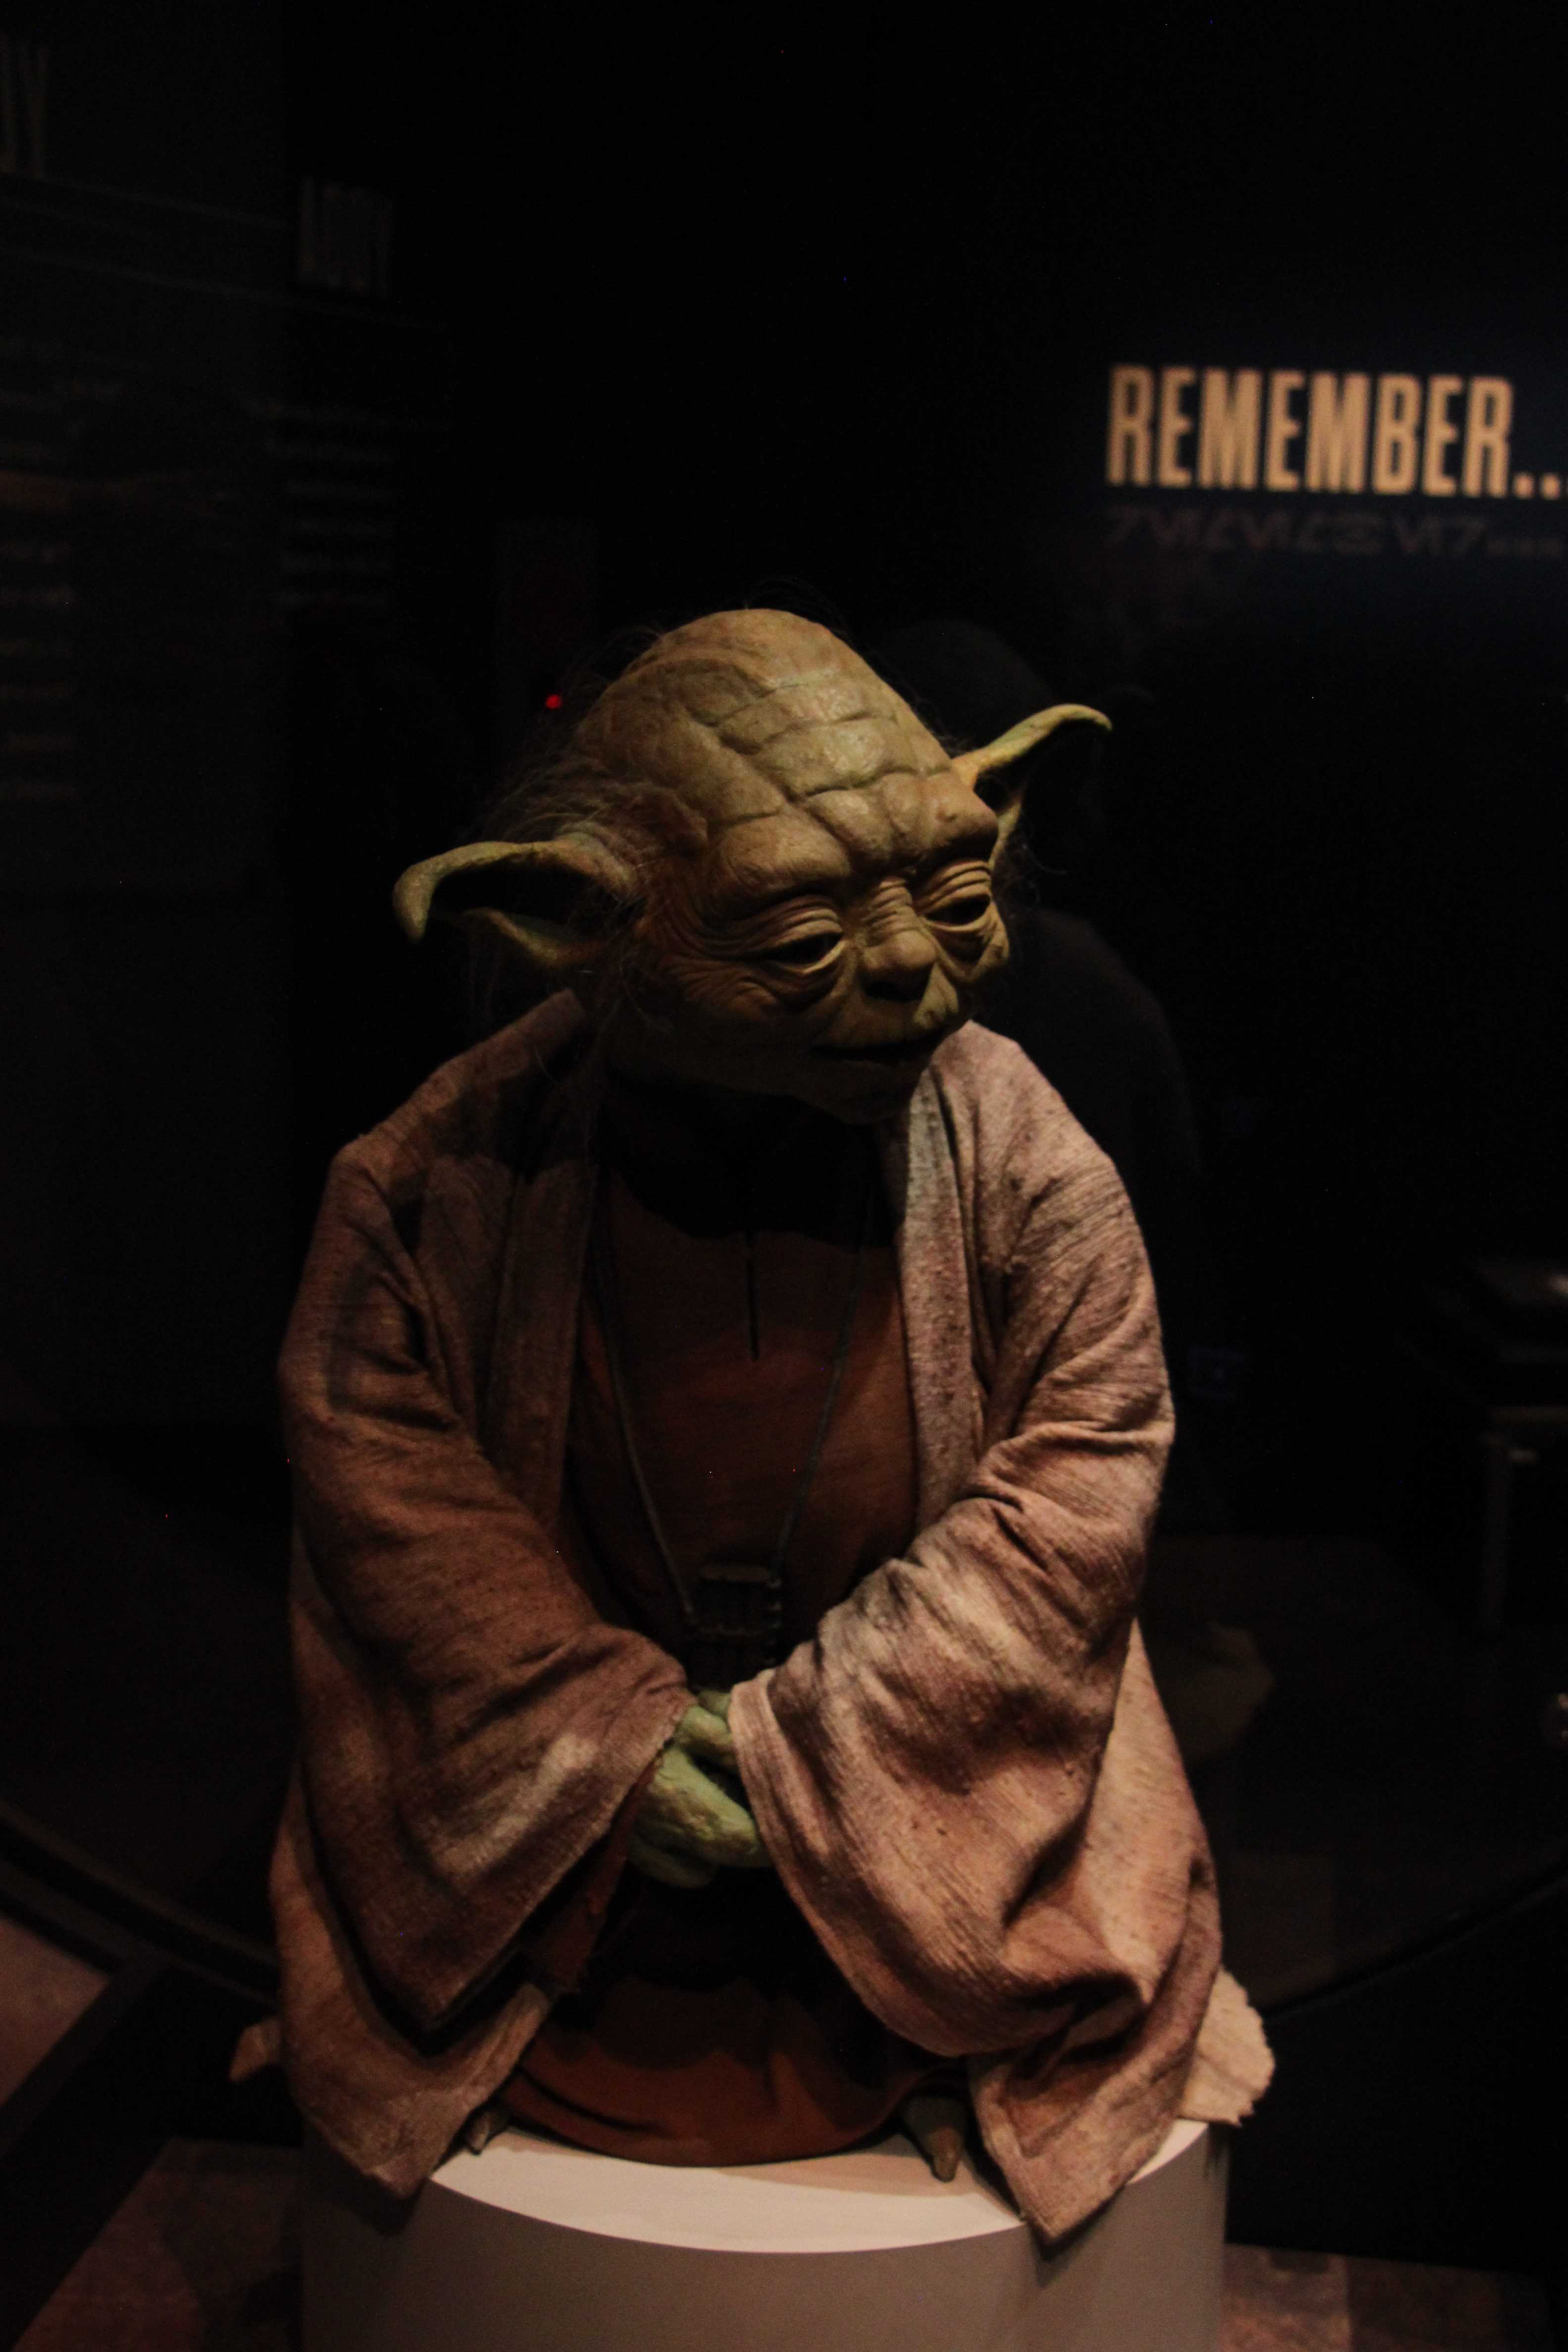 Star+Wars+and+the+Power+of+Costume+Exhibit+Review%2FGallery